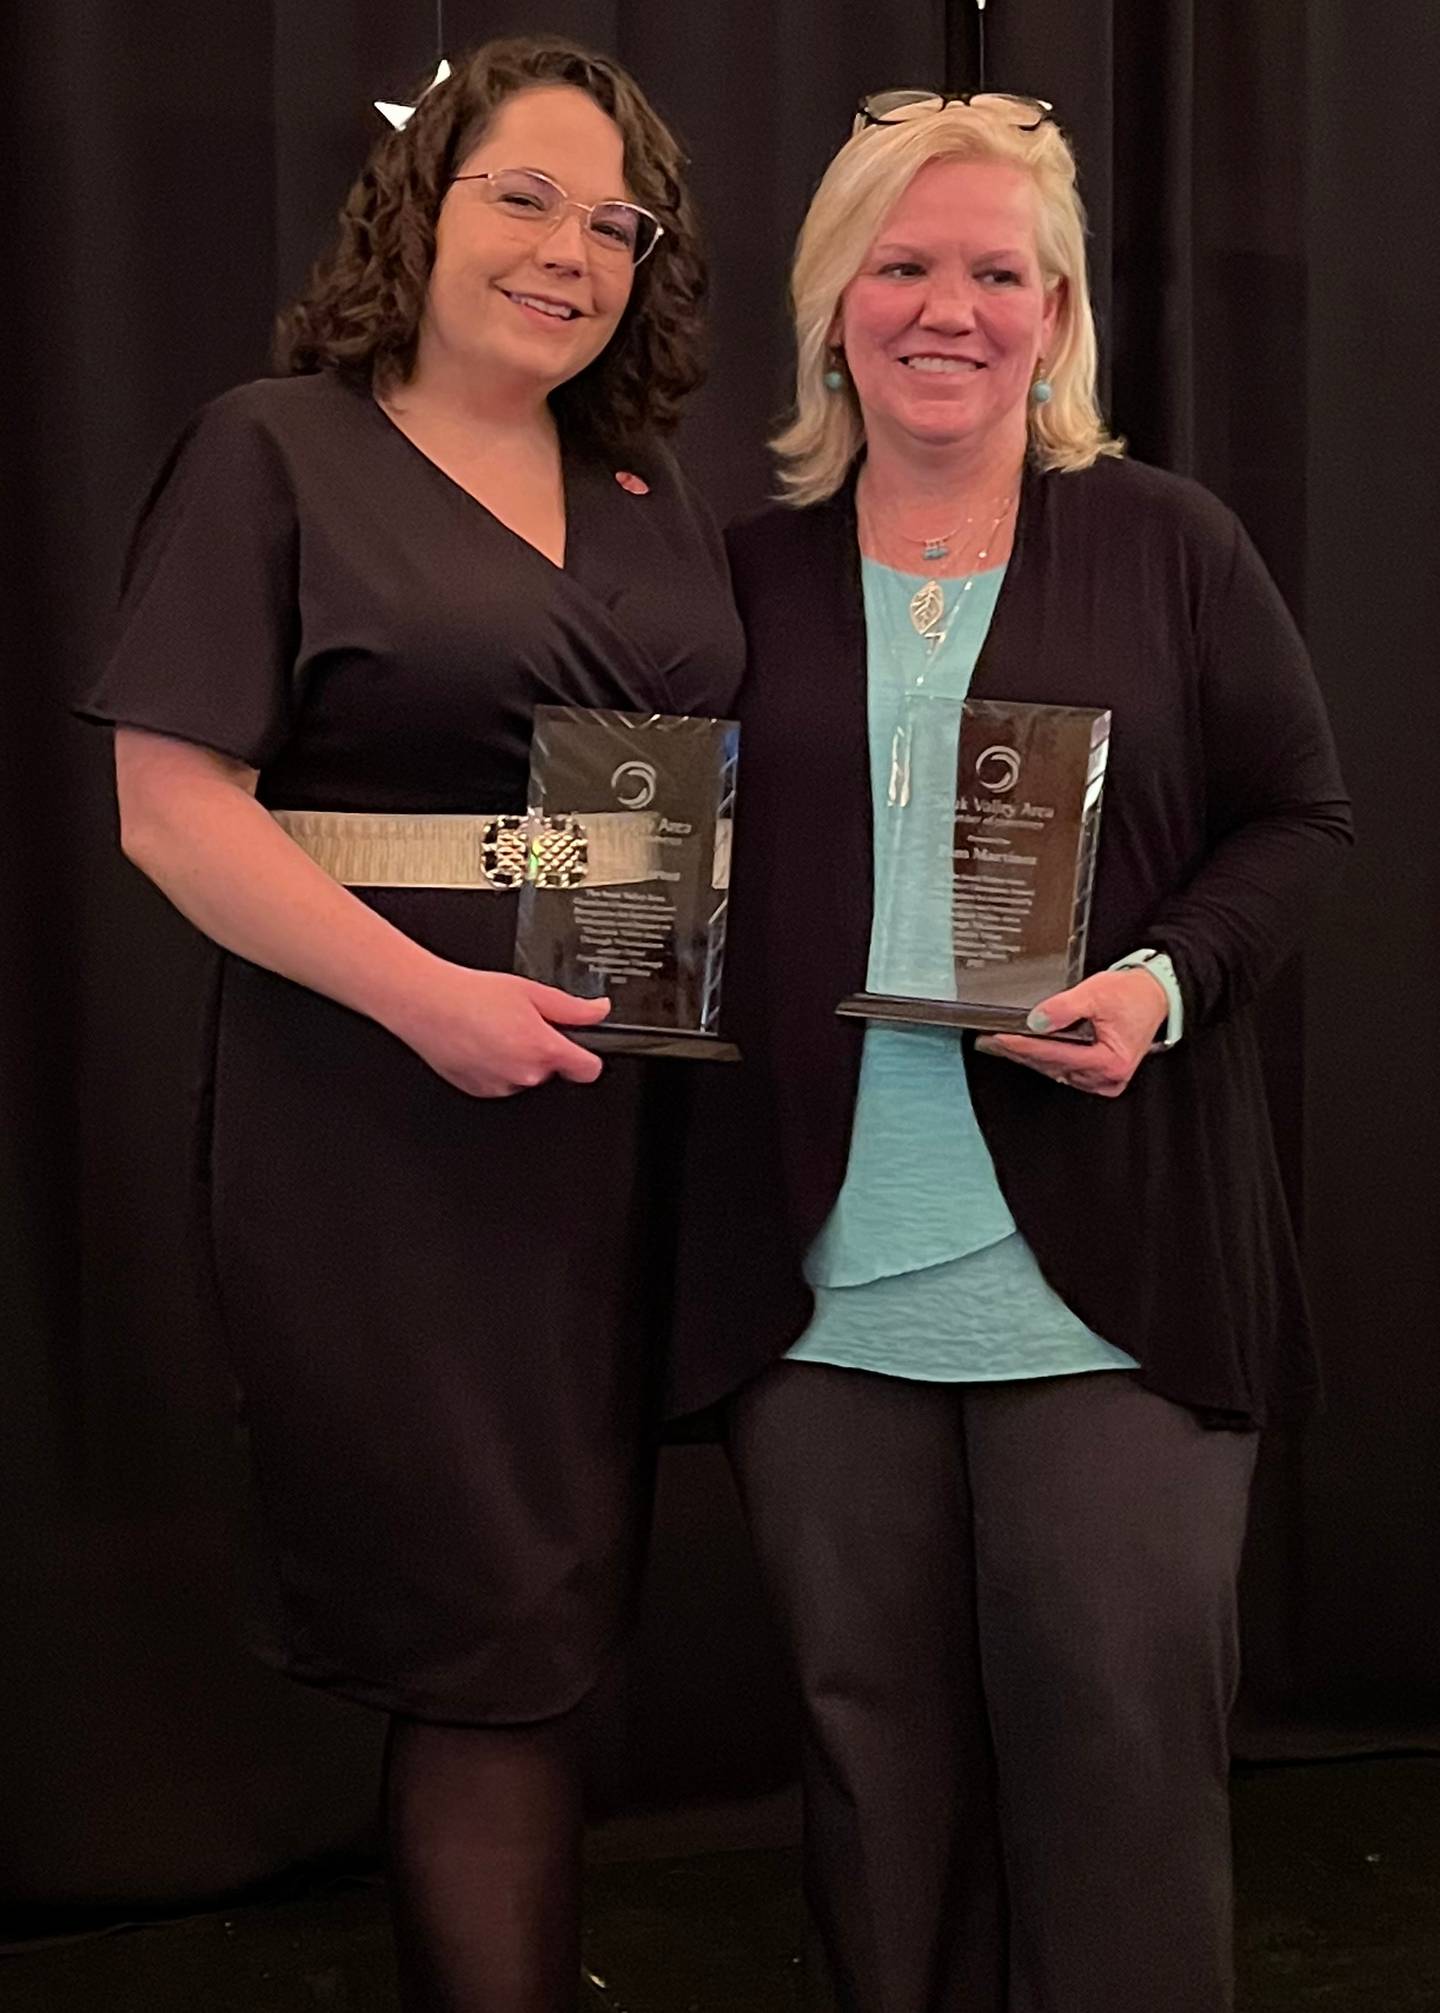 (Left to right); Sauk Valley Area Chamber of Commerce Champion Award recipients Lori Cortez and Pam Martinez